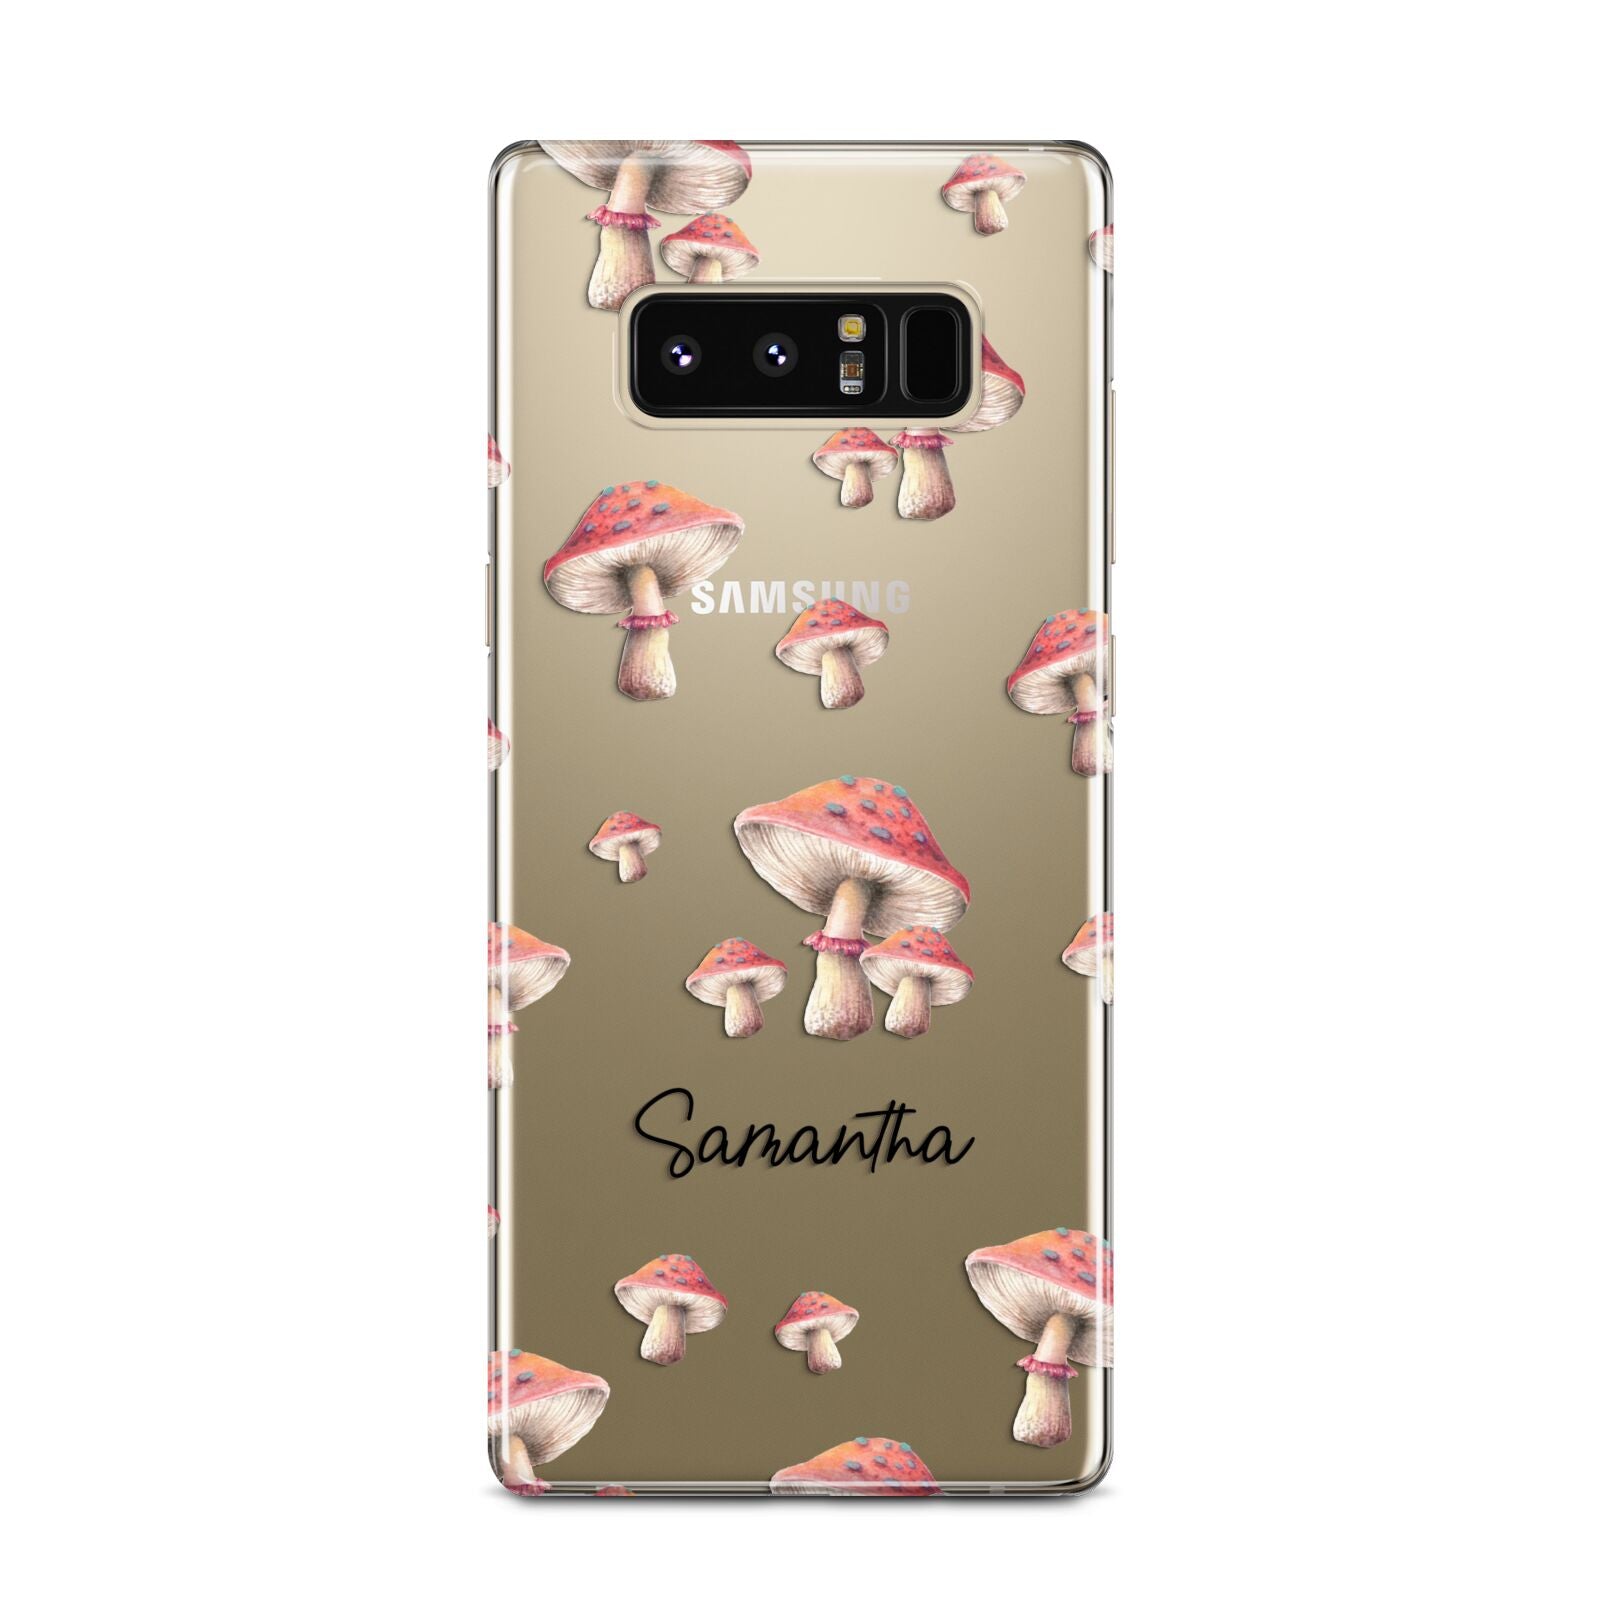 Mushroom Illustrations with Name Samsung Galaxy Note 8 Case